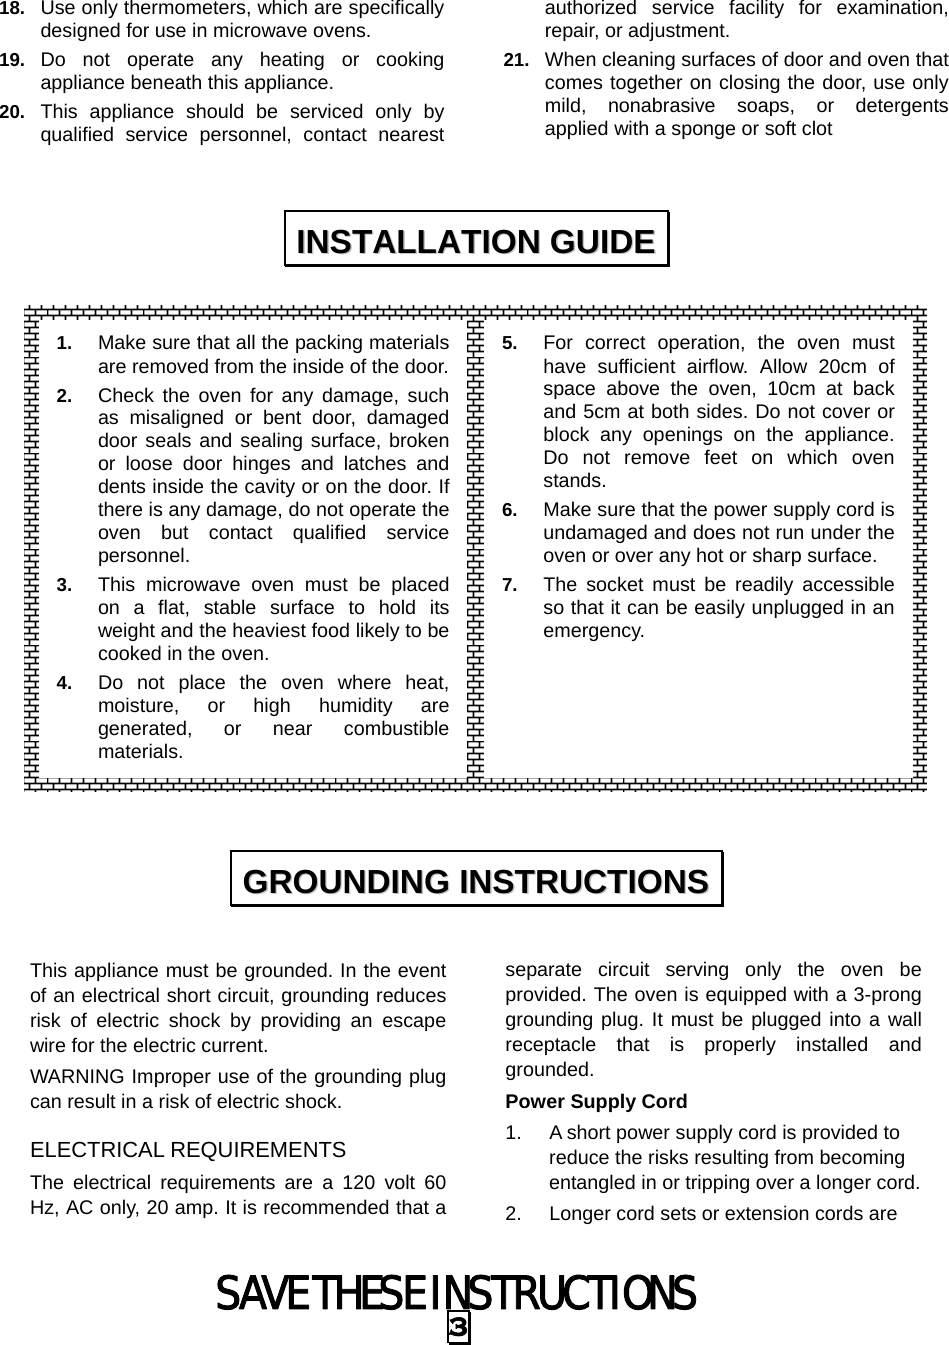 SAVE THESE INSTRUCTIONS 3 18.  Use only thermometers, which are specifically designed for use in microwave ovens. 19.  Do not operate any heating or cooking appliance beneath this appliance. 20.  This appliance should be serviced only by qualified service personnel, contact nearest authorized service facility for examination, repair, or adjustment. 21.  When cleaning surfaces of door and oven that comes together on closing the door, use only mild, nonabrasive soaps, or detergents applied with a sponge or soft clot                   This appliance must be grounded. In the event of an electrical short circuit, grounding reduces risk of electric shock by providing an escape wire for the electric current.   WARNING Improper use of the grounding plug can result in a risk of electric shock. ELECTRICAL REQUIREMENTS The electrical requirements are a 120 volt 60 Hz, AC only, 20 amp. It is recommended that a separate circuit serving only the oven be provided. The oven is equipped with a 3-prong grounding plug. It must be plugged into a wall receptacle that is properly installed and grounded.  Power Supply Cord 1.  A short power supply cord is provided to reduce the risks resulting from becoming entangled in or tripping over a longer cord. 2.  Longer cord sets or extension cords are IINNSSTTAALLLLAATTIIOONN  GGUUIIDDEE  GGRROOUUNNDDIINNGG  IINNSSTTRRUUCCTTIIOONNSS  1.  Make sure that all the packing materials are removed from the inside of the door.2.  Check the oven for any damage, such as misaligned or bent door, damaged door seals and sealing surface, broken or loose door hinges and latches and dents inside the cavity or on the door. If there is any damage, do not operate the oven but contact qualified service personnel. 3.  This microwave oven must be placed on a flat, stable surface to hold its weight and the heaviest food likely to be cooked in the oven.   4.  Do not place the oven where heat, moisture, or high humidity are generated, or near combustible materials. 5.  For correct operation, the oven must have sufficient airflow. Allow 20cm of space above the oven, 10cm at back and 5cm at both sides. Do not cover or block any openings on the appliance. Do not remove feet on which oven stands. 6.  Make sure that the power supply cord is undamaged and does not run under the oven or over any hot or sharp surface. 7.  The socket must be readily accessible so that it can be easily unplugged in an emergency. 